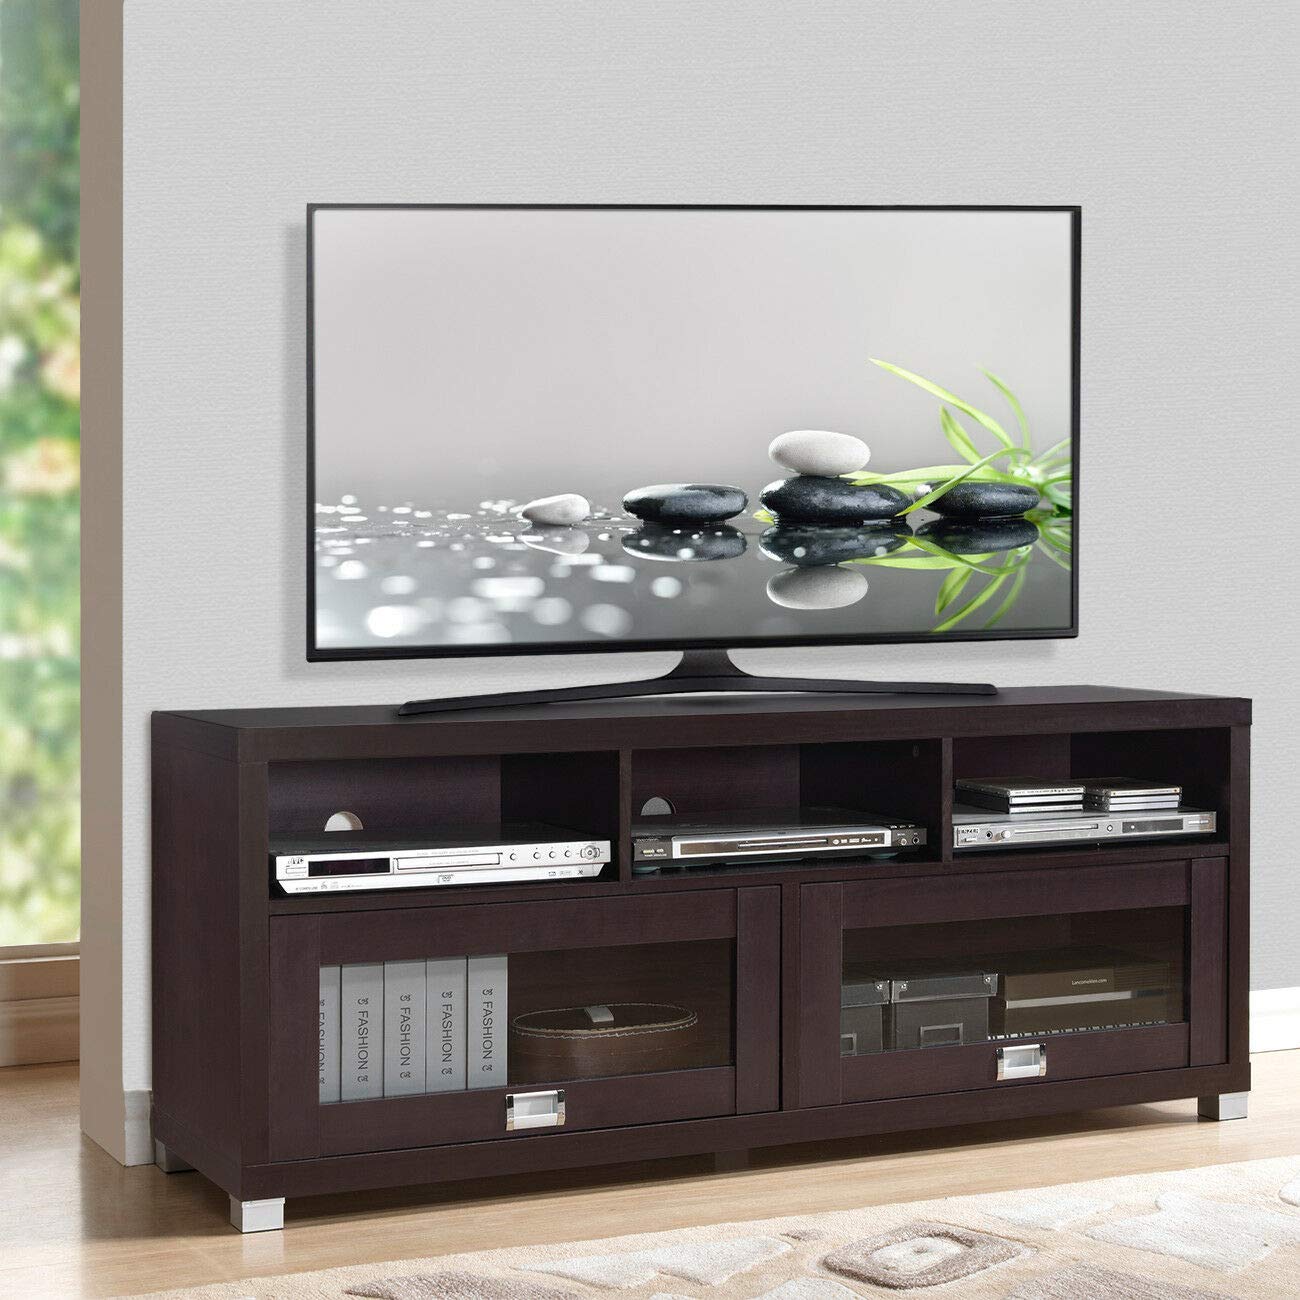 Overwhelmingly Stylish Ideas On Storage Furniture TV Solutions